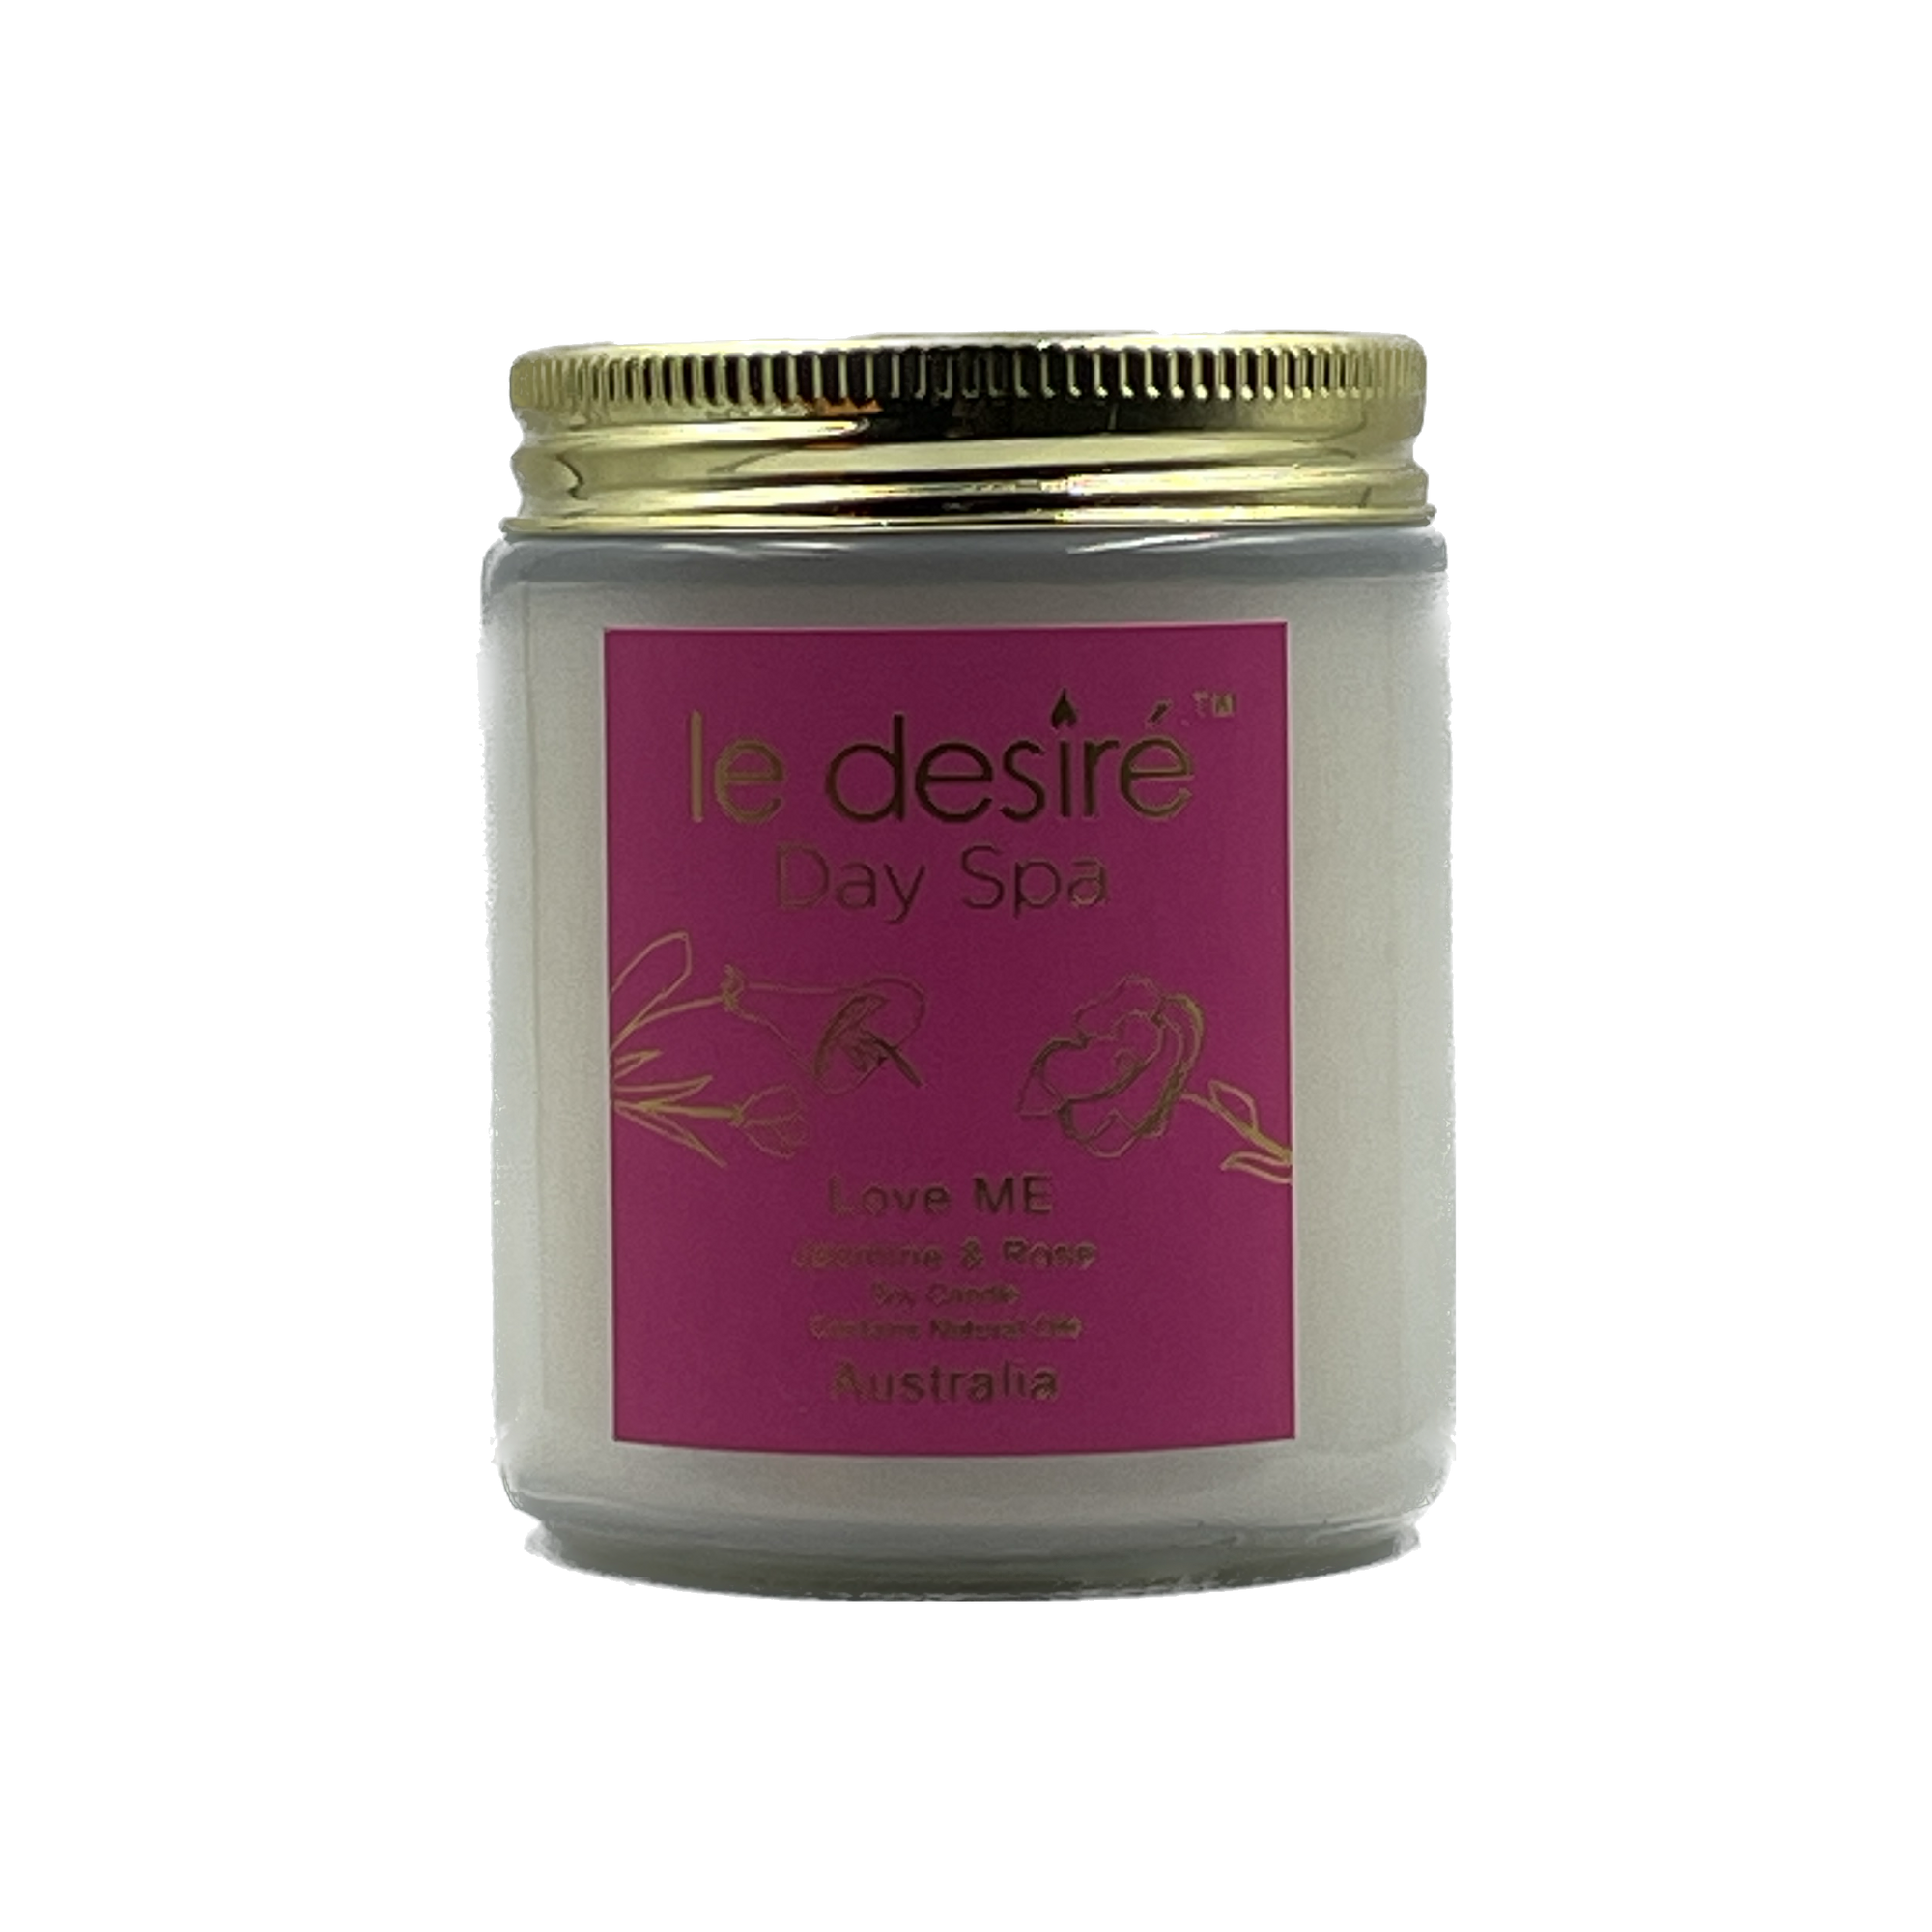 Love ME (Jasmine & Rose) - Day Spa Soy Candle